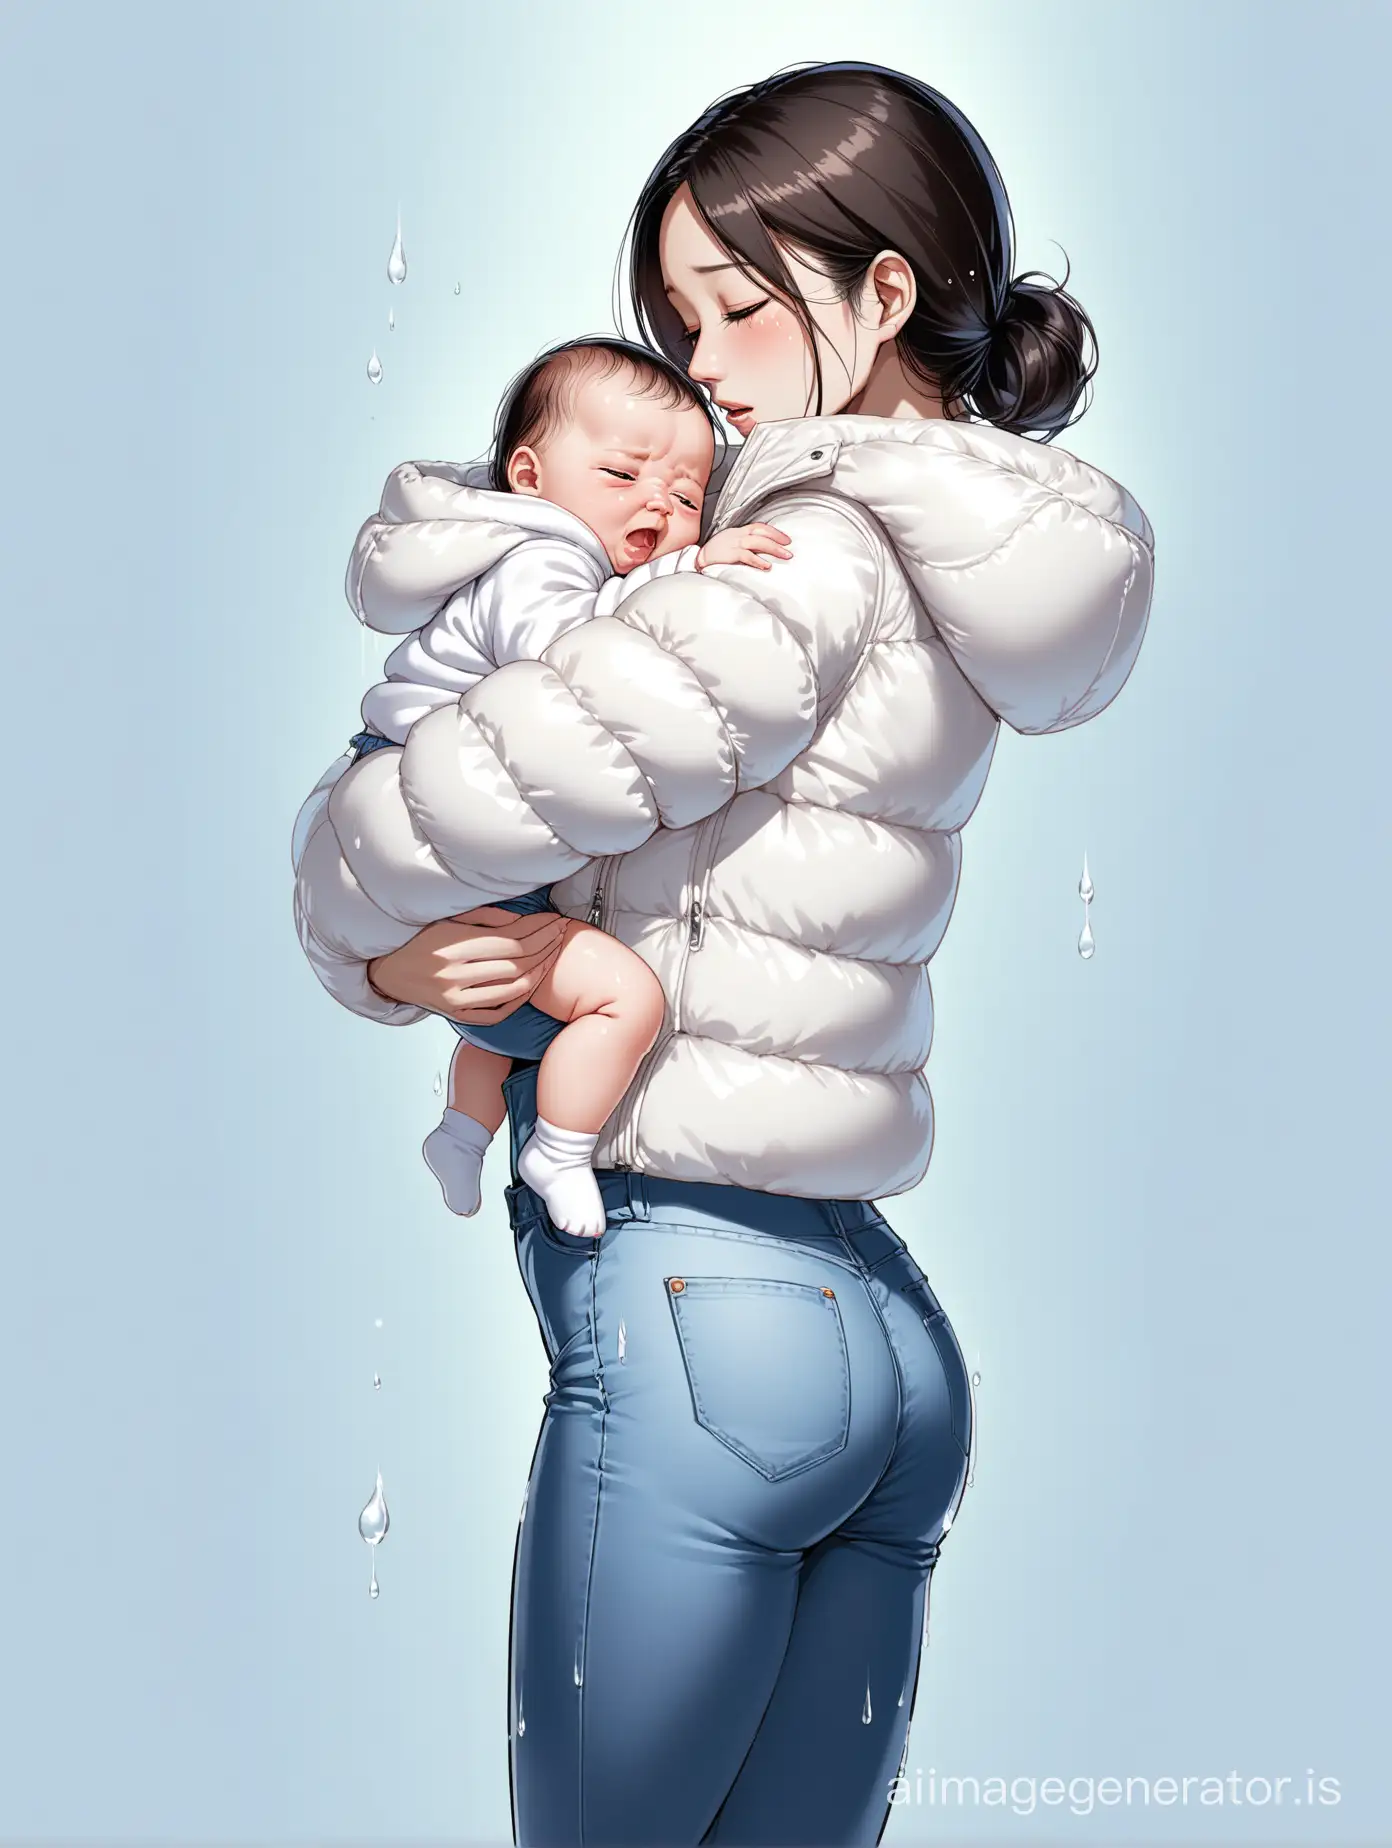 Comforting-Chinese-Mother-Soothing-Crying-Baby-in-Winter-Attire